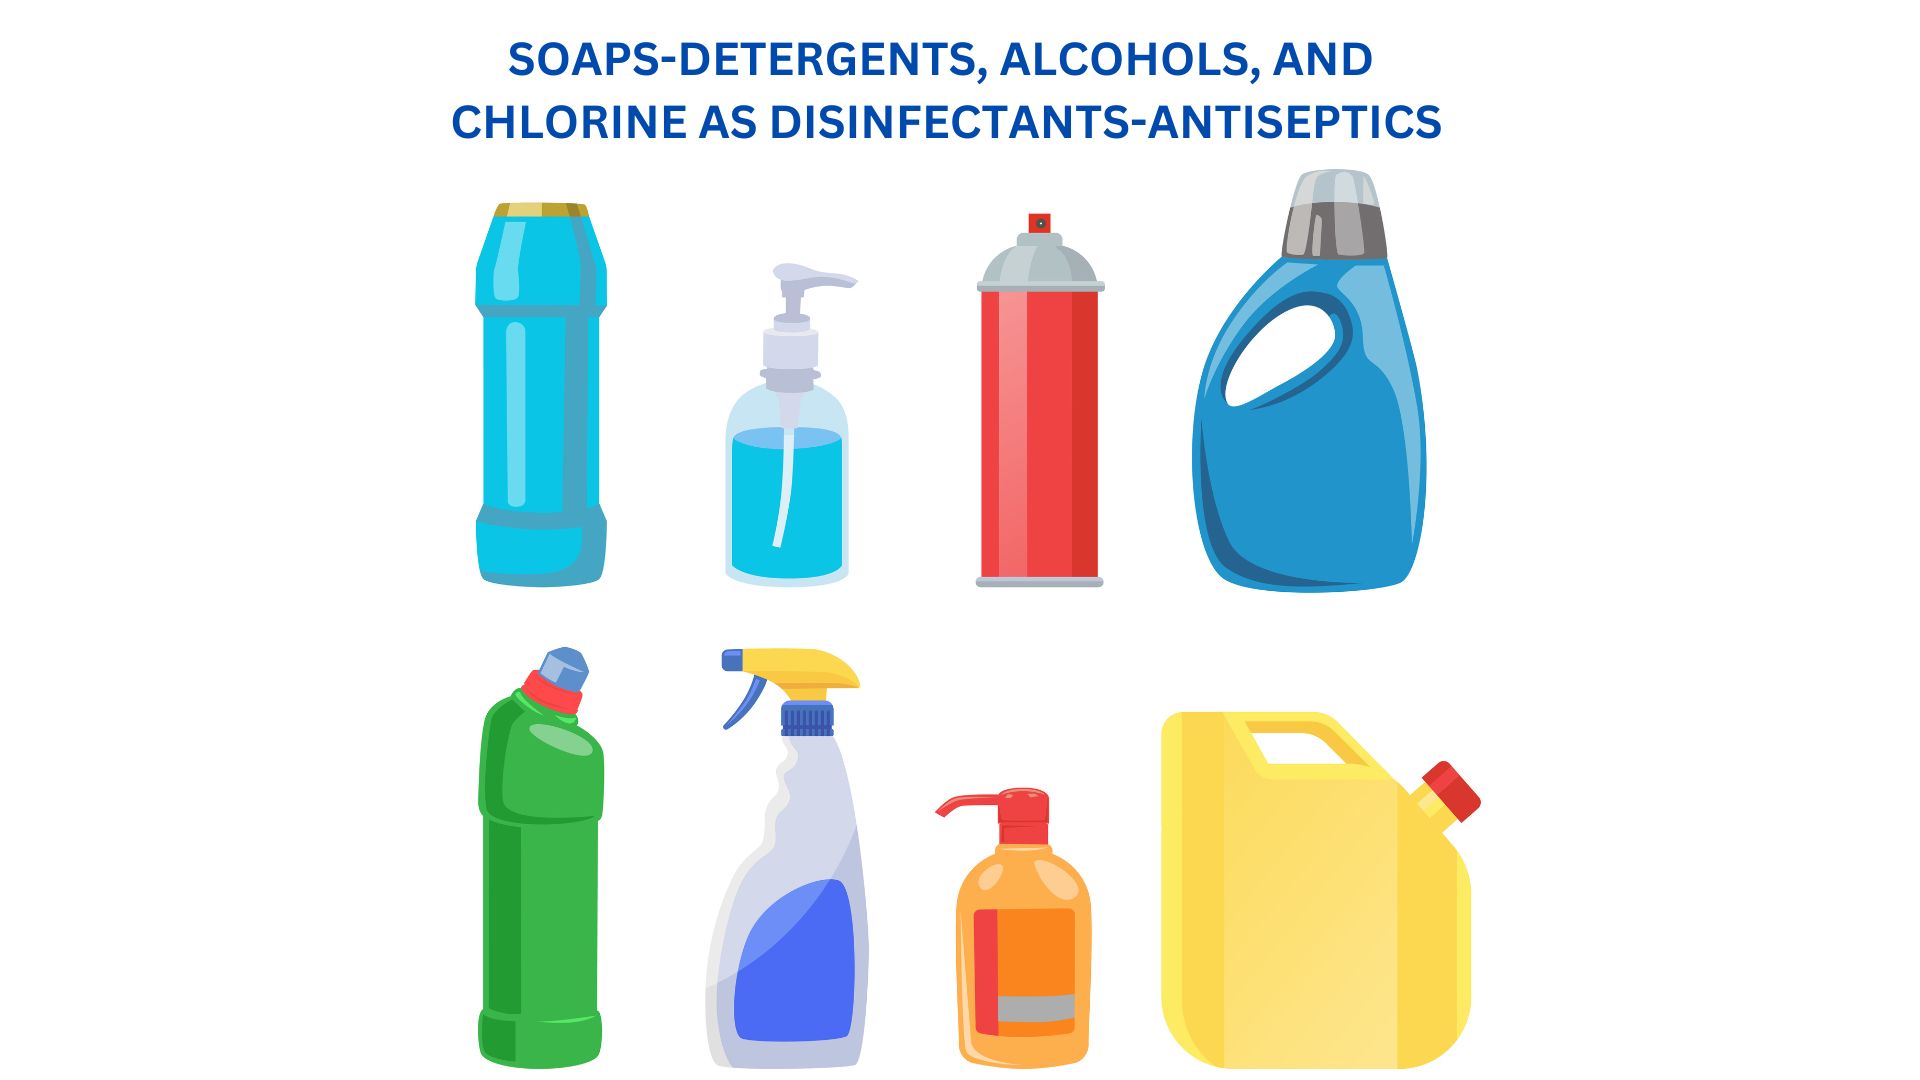 SOAPS-DETERGENTS, ALCOHOLS, AND CHLORINE AS DISINFECTANTS-ANTISEPTICS